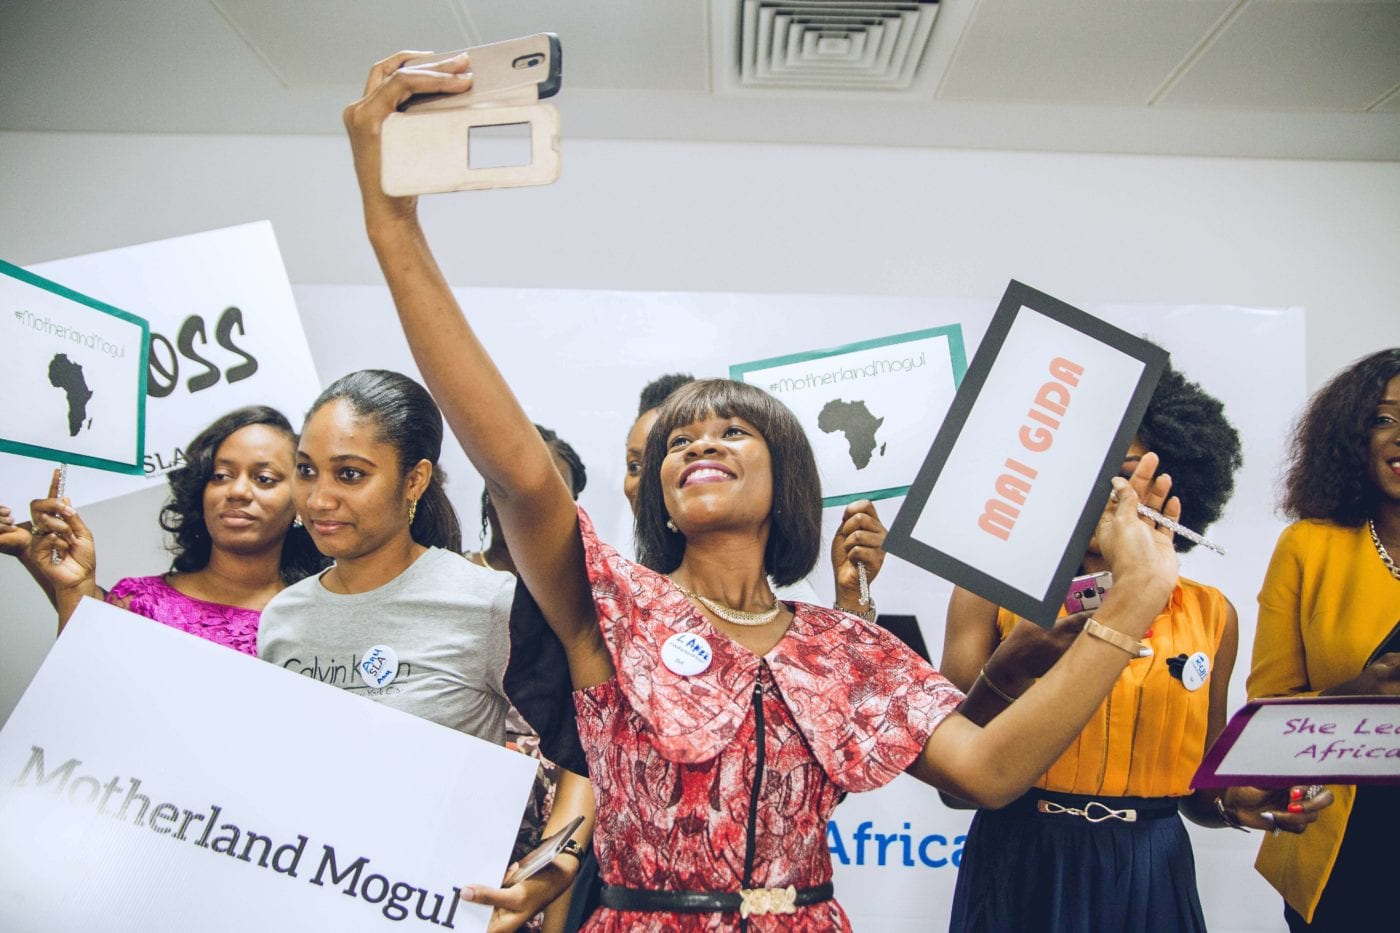 shehive lagos she leads africa